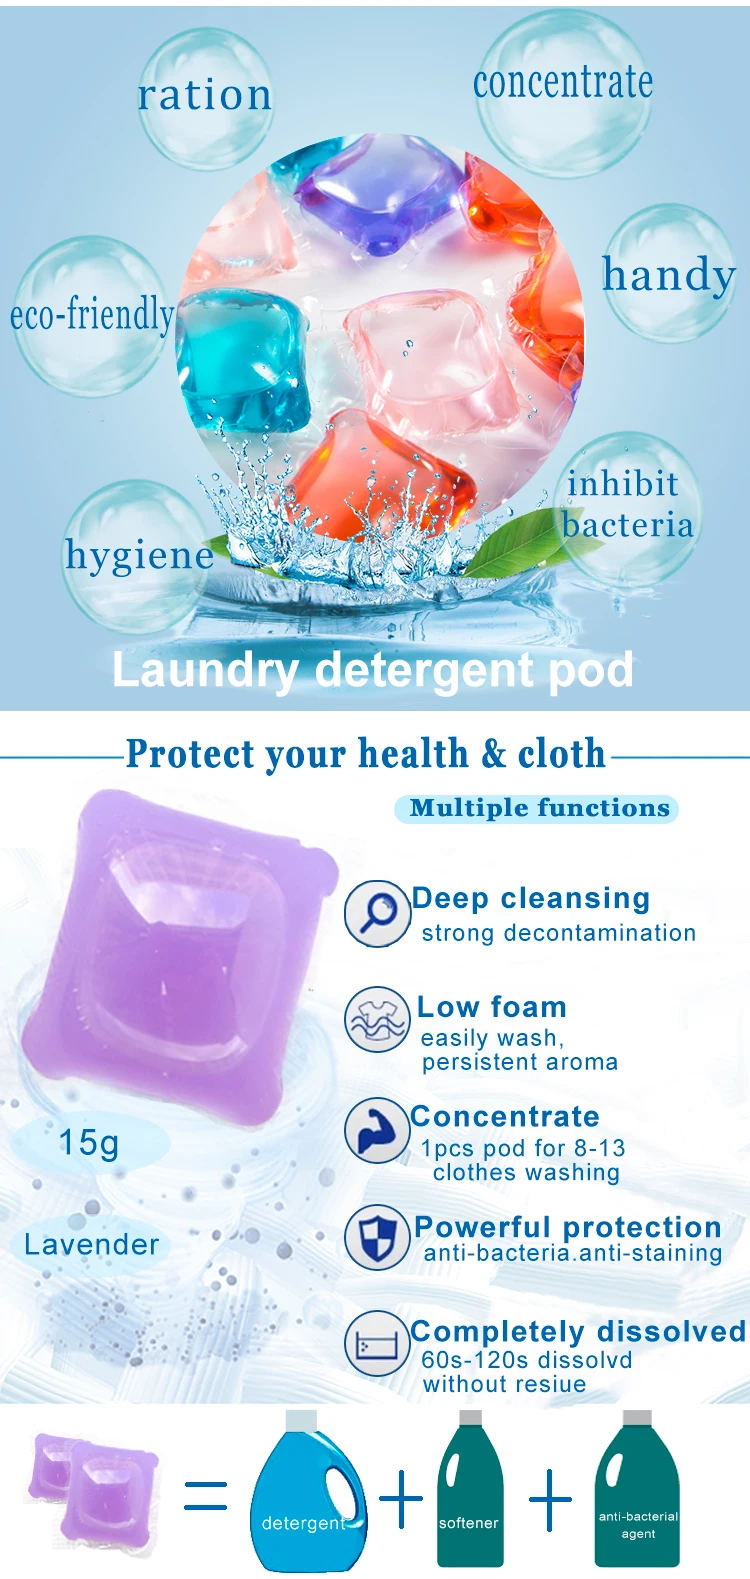 Hot models can be customized to remove stains deep clean laundry gel beads detergent pods.